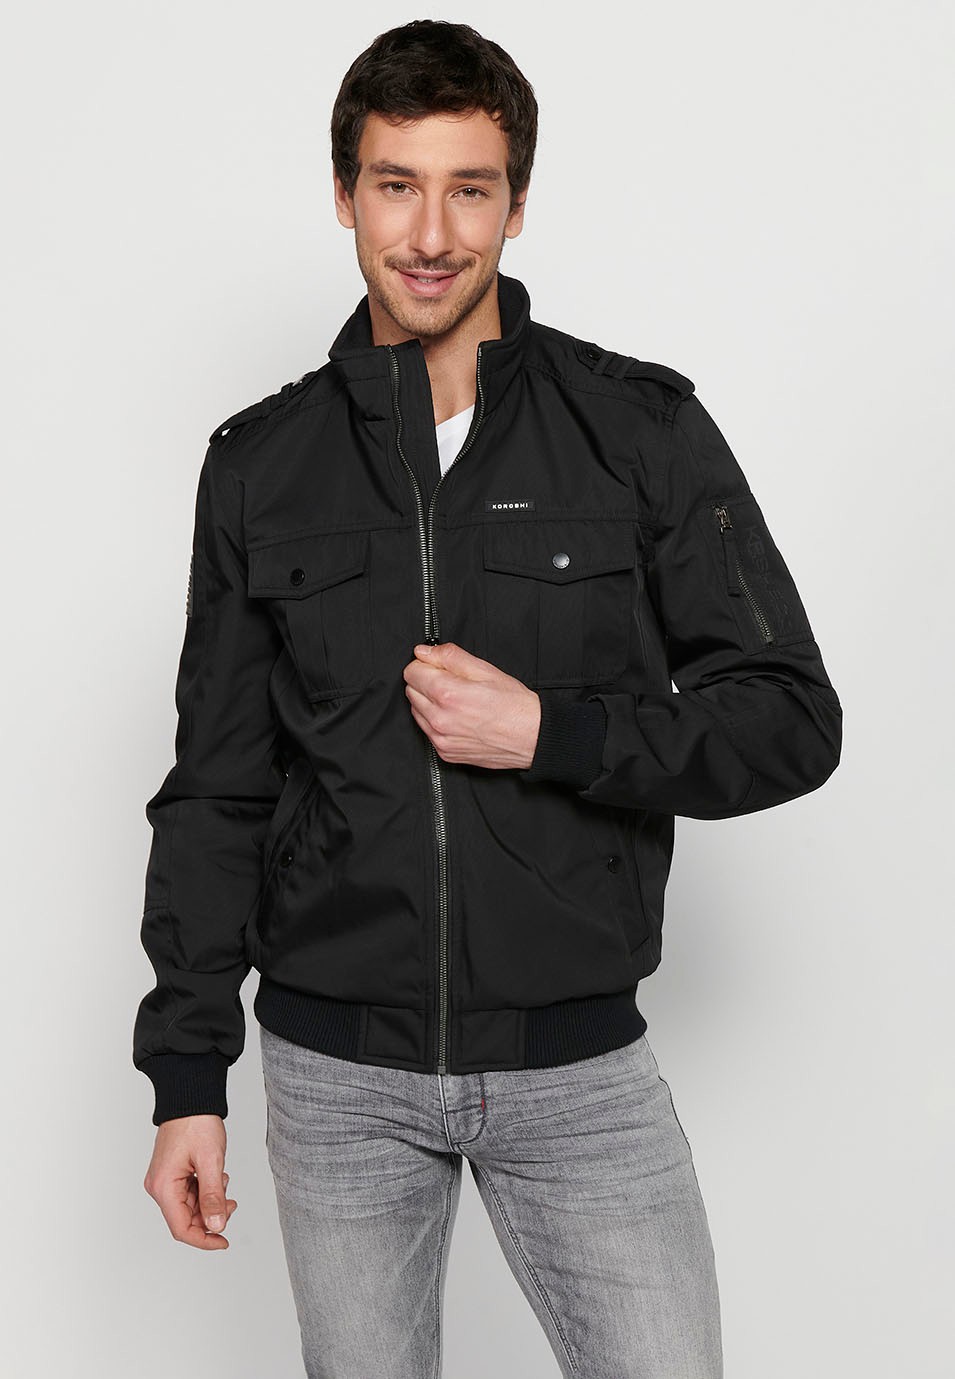 Black Long Sleeve Jacket with Round Neck and Front Zipper Closure with Flap Pockets for Men 6